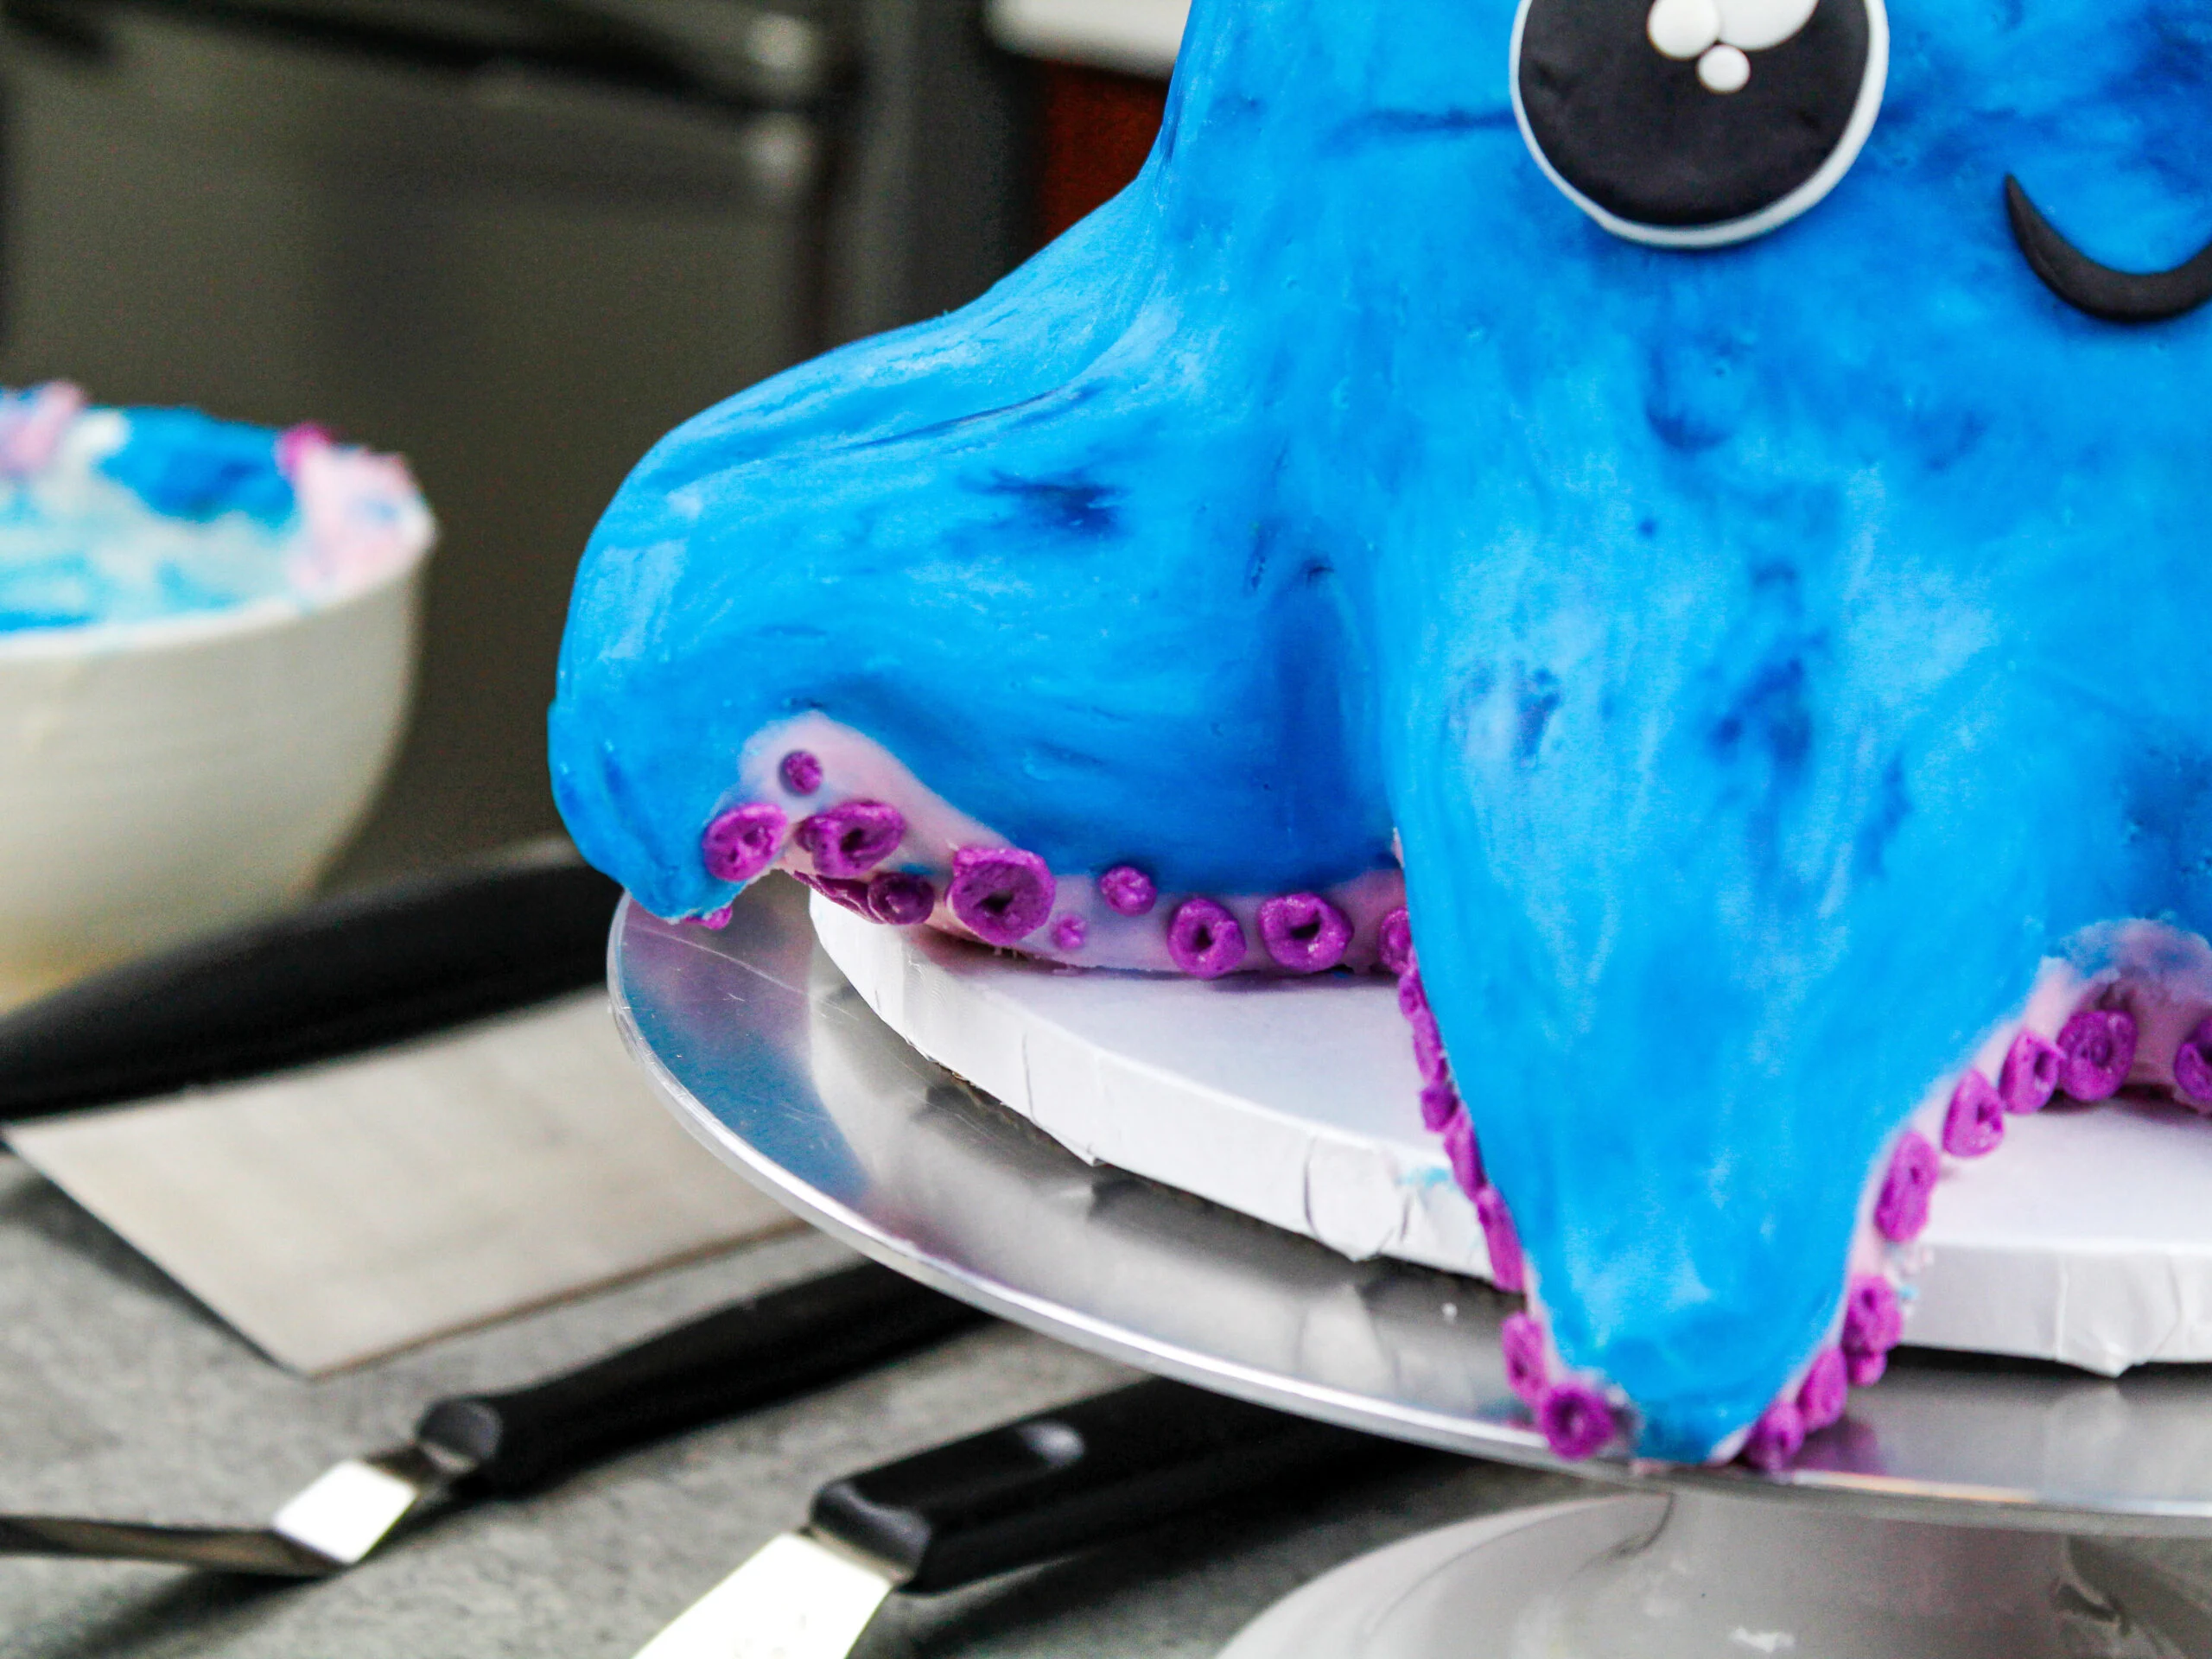 image of an octopus cake close up to show the detail on its arm or tentacle